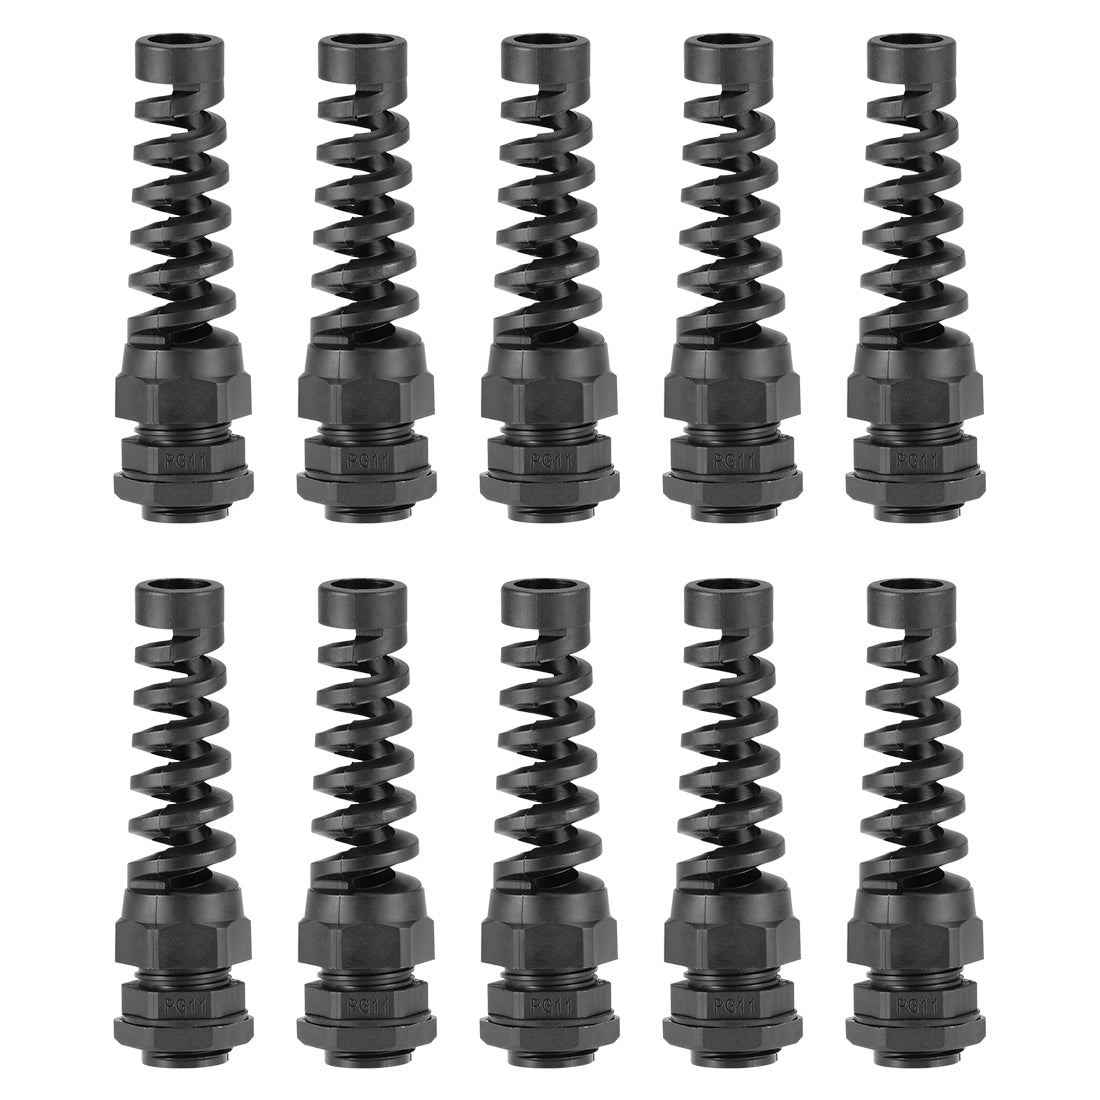 uxcell Uxcell PG11 Cable Gland 5mm-10mm Wire Hole Waterproof Nylon Joint Adjustable Locknut with Strain Relief Black 10pcs